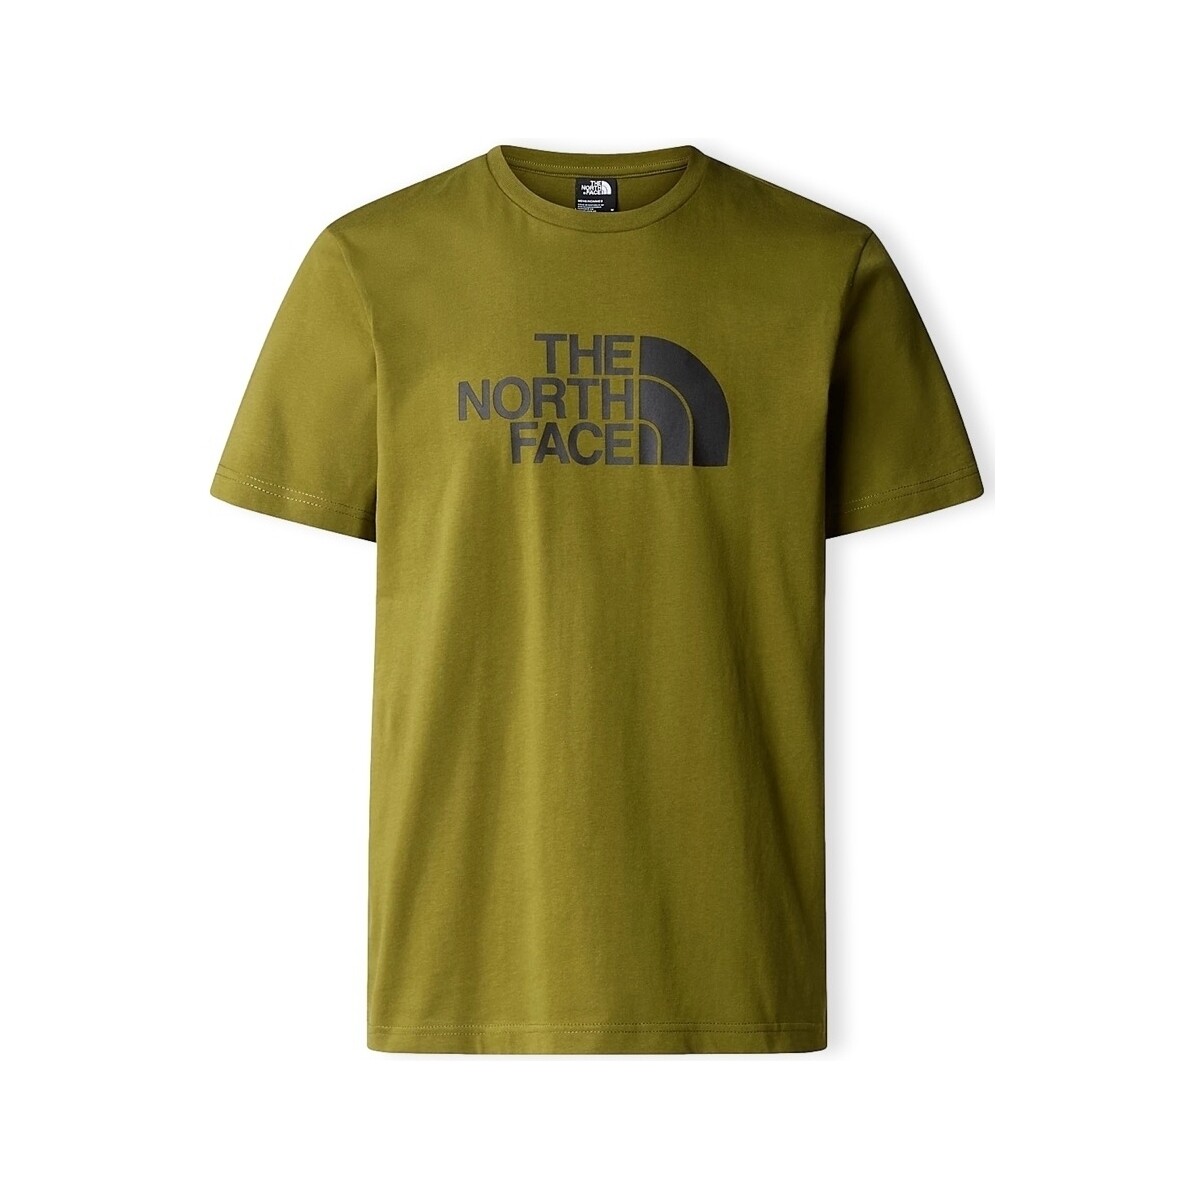 Kleidung Herren T-Shirts & Poloshirts The North Face Easy T-Shirt - Forest Olive Grün